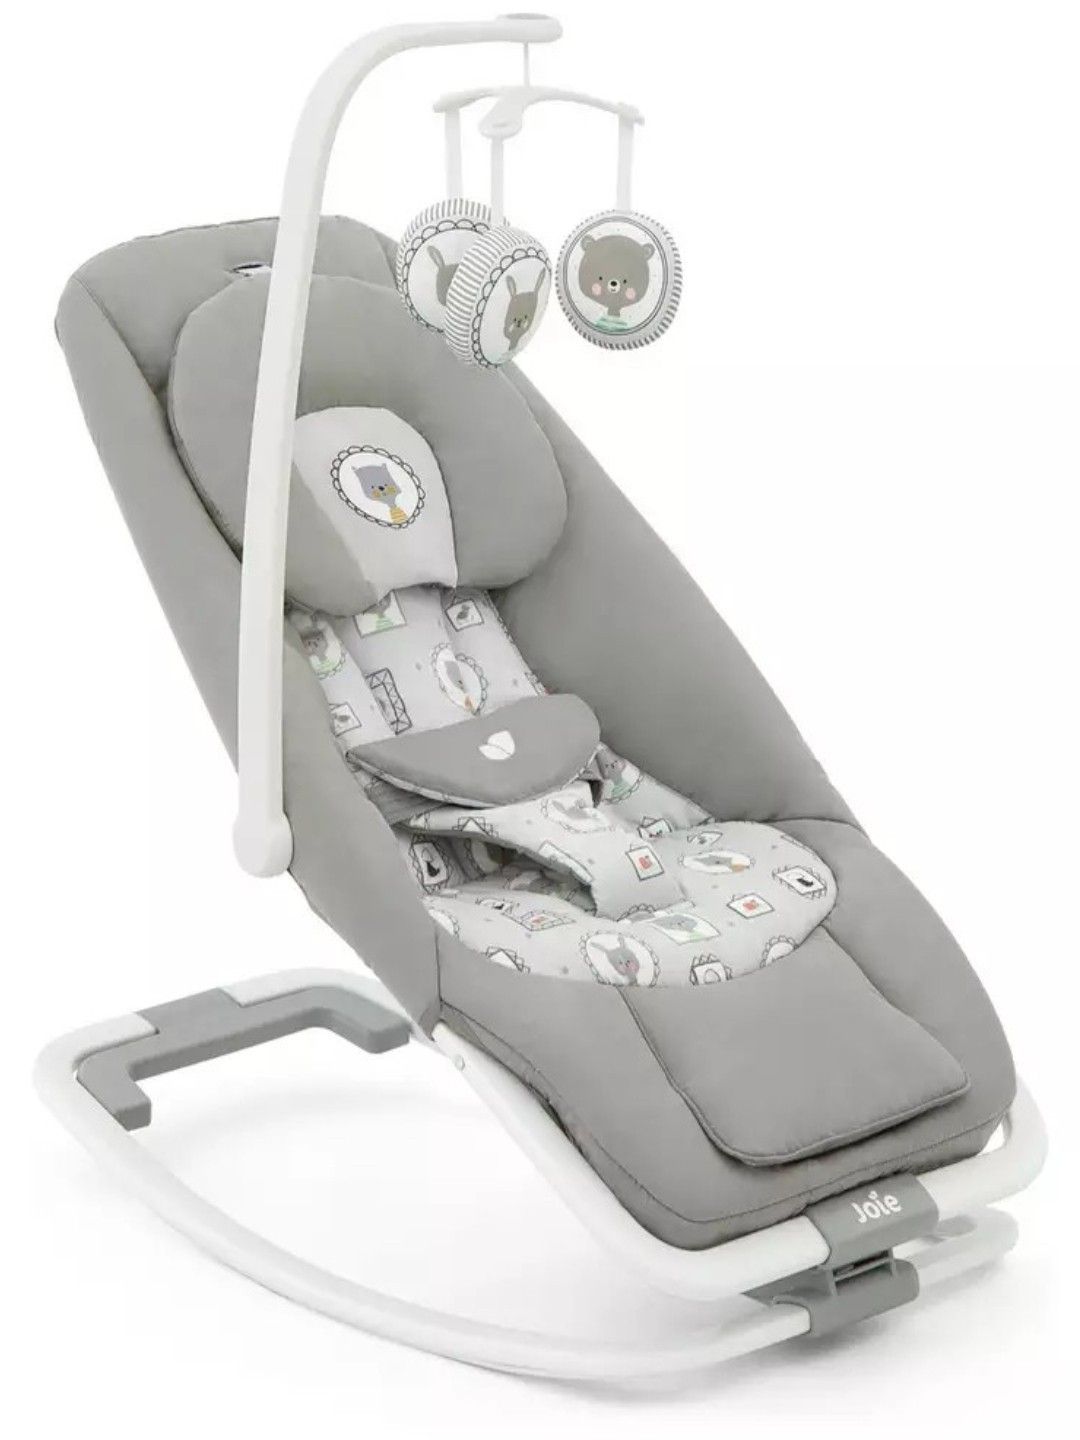 Joie Dreamer with Infant Insert Baby Bouncer (Portrait)